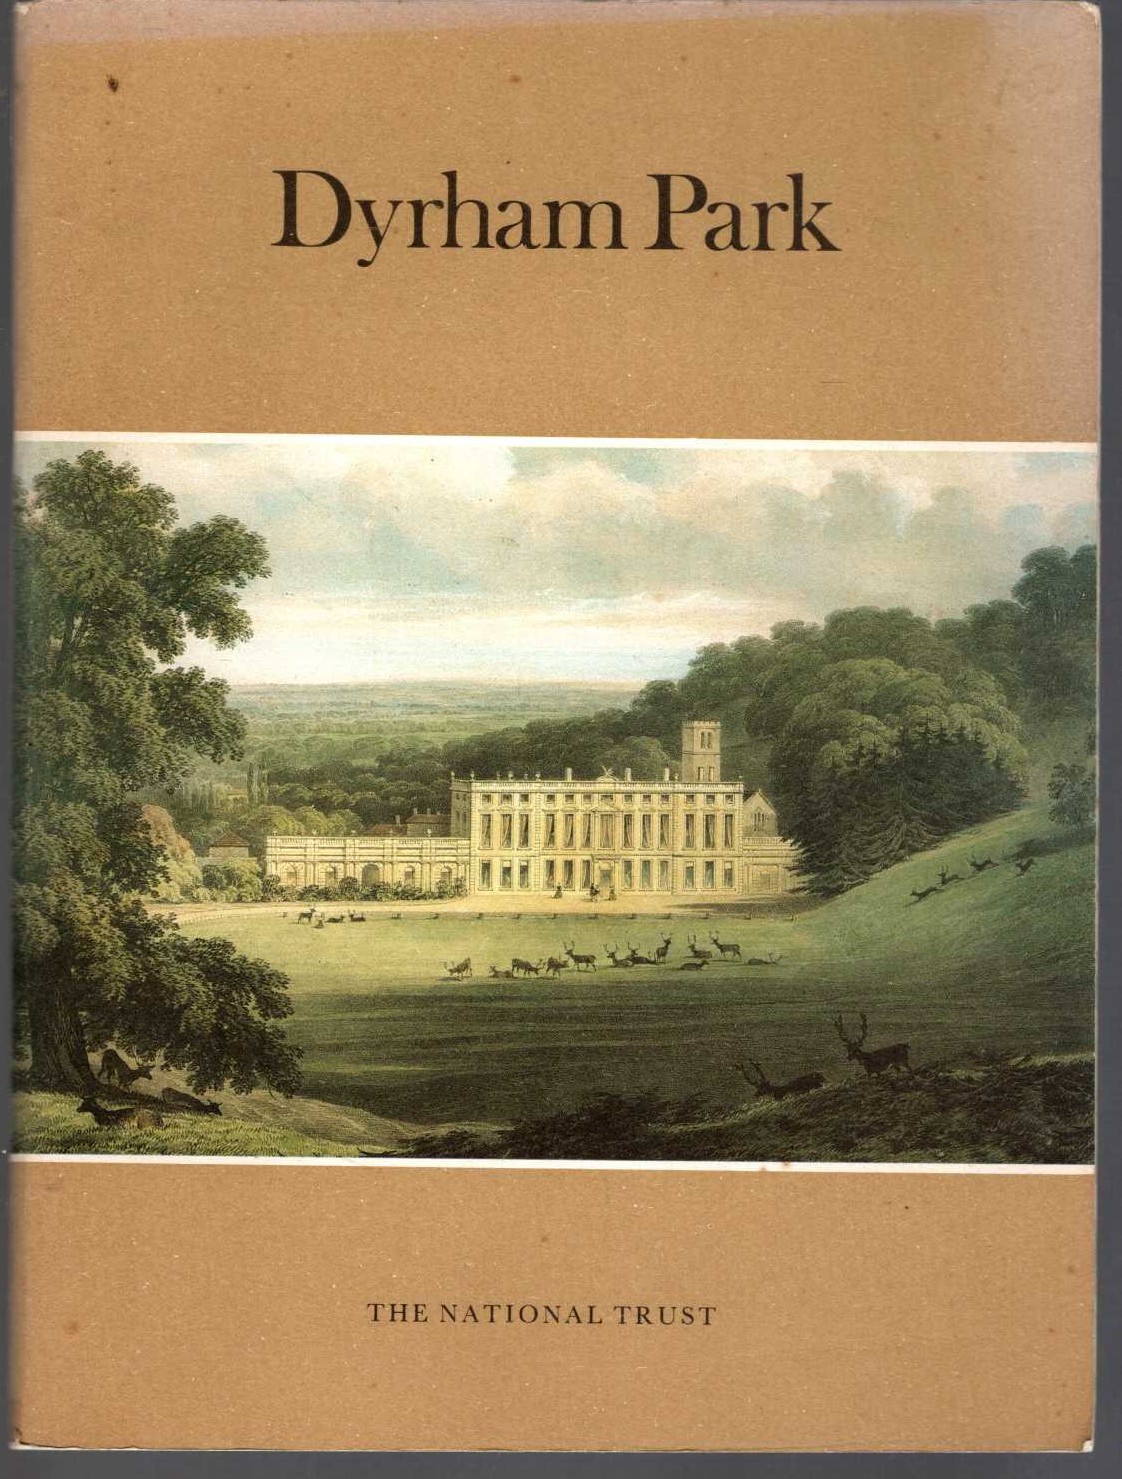 \ DYRHAM PARK by The National Trust front book cover image